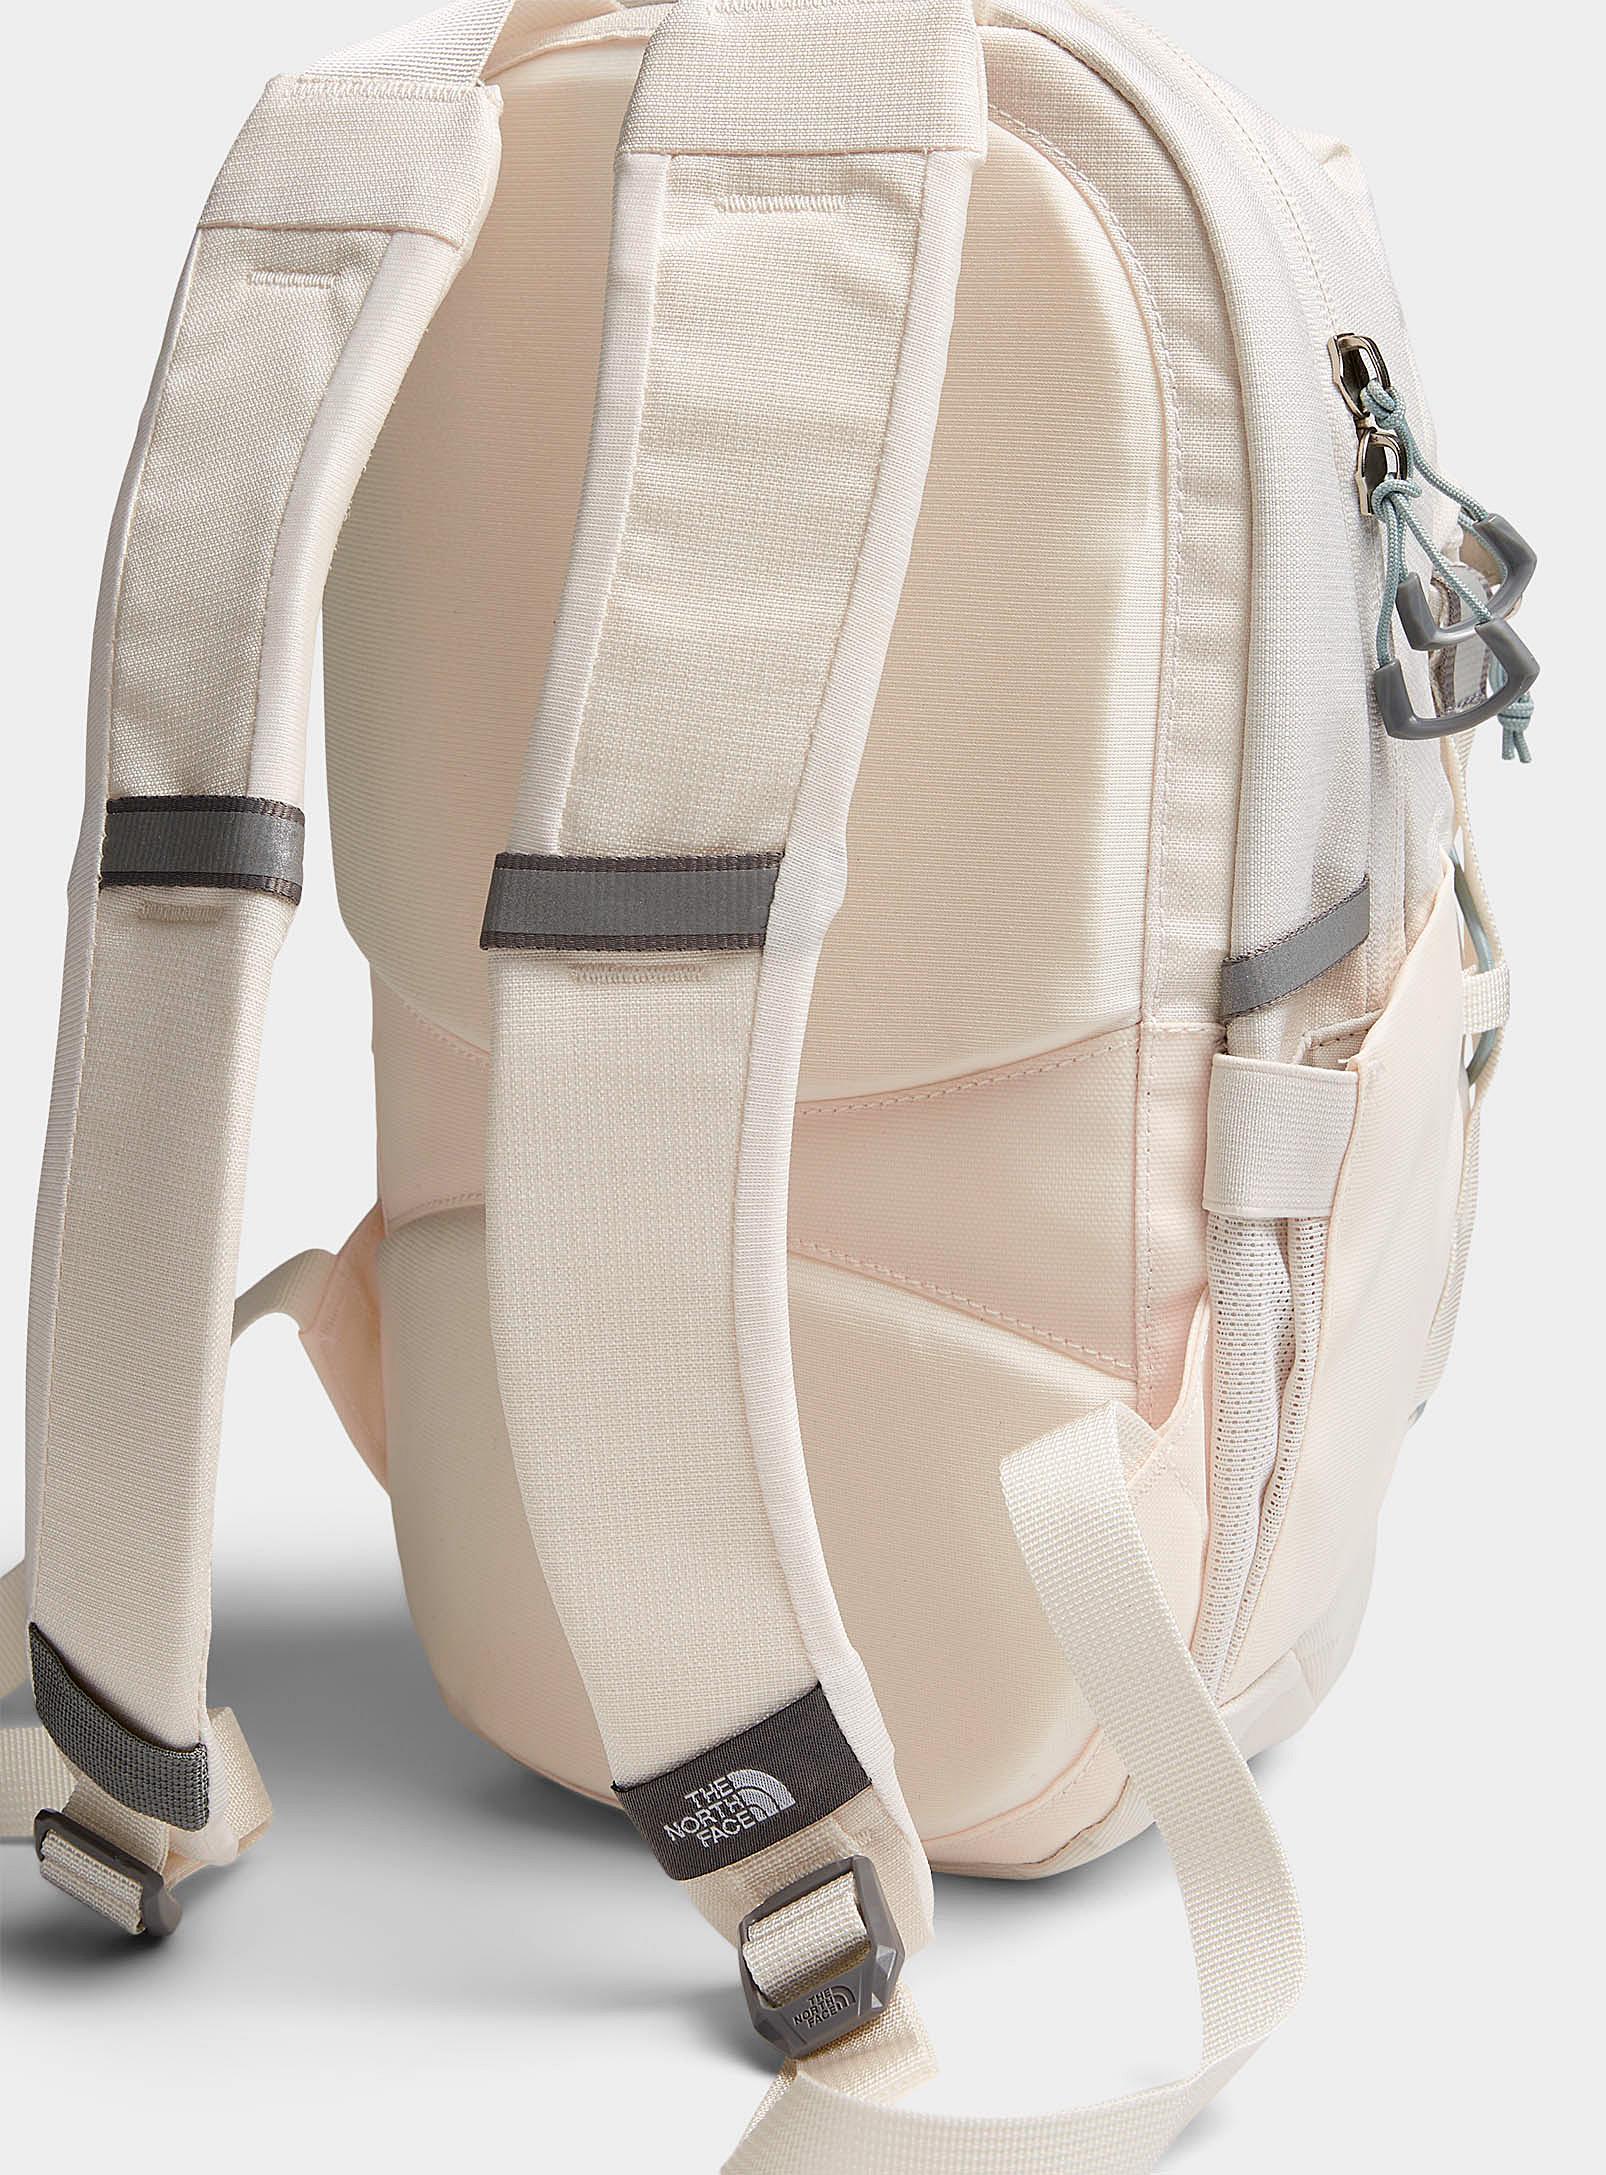 The North Face Borealis Mini Backpack in White | Lyst